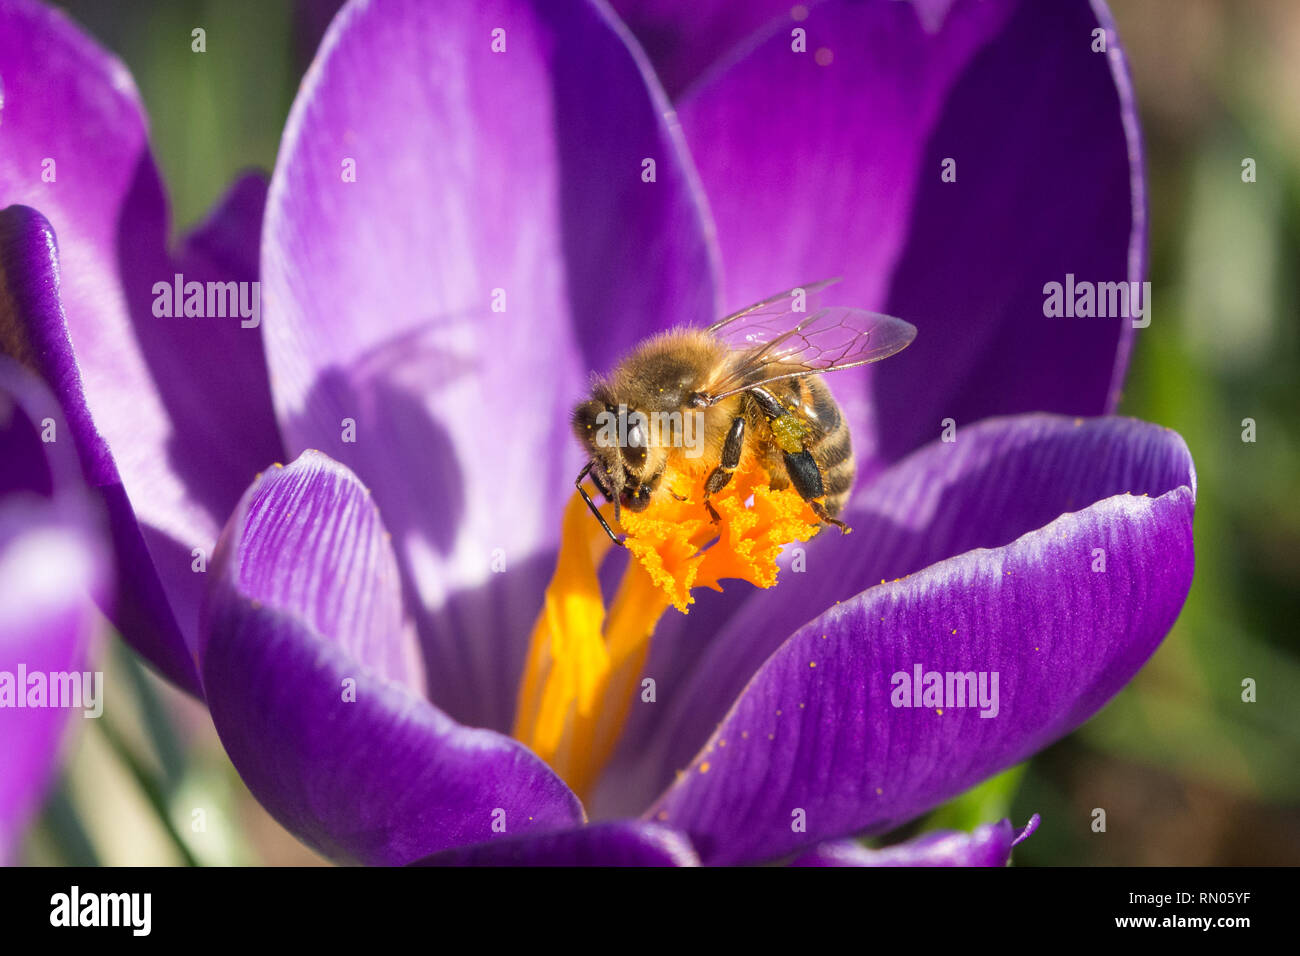 Bee (honey bee), an important pollinator, nectaring on a crocus flower in February. Spring wildlife, social insect. Stock Photo